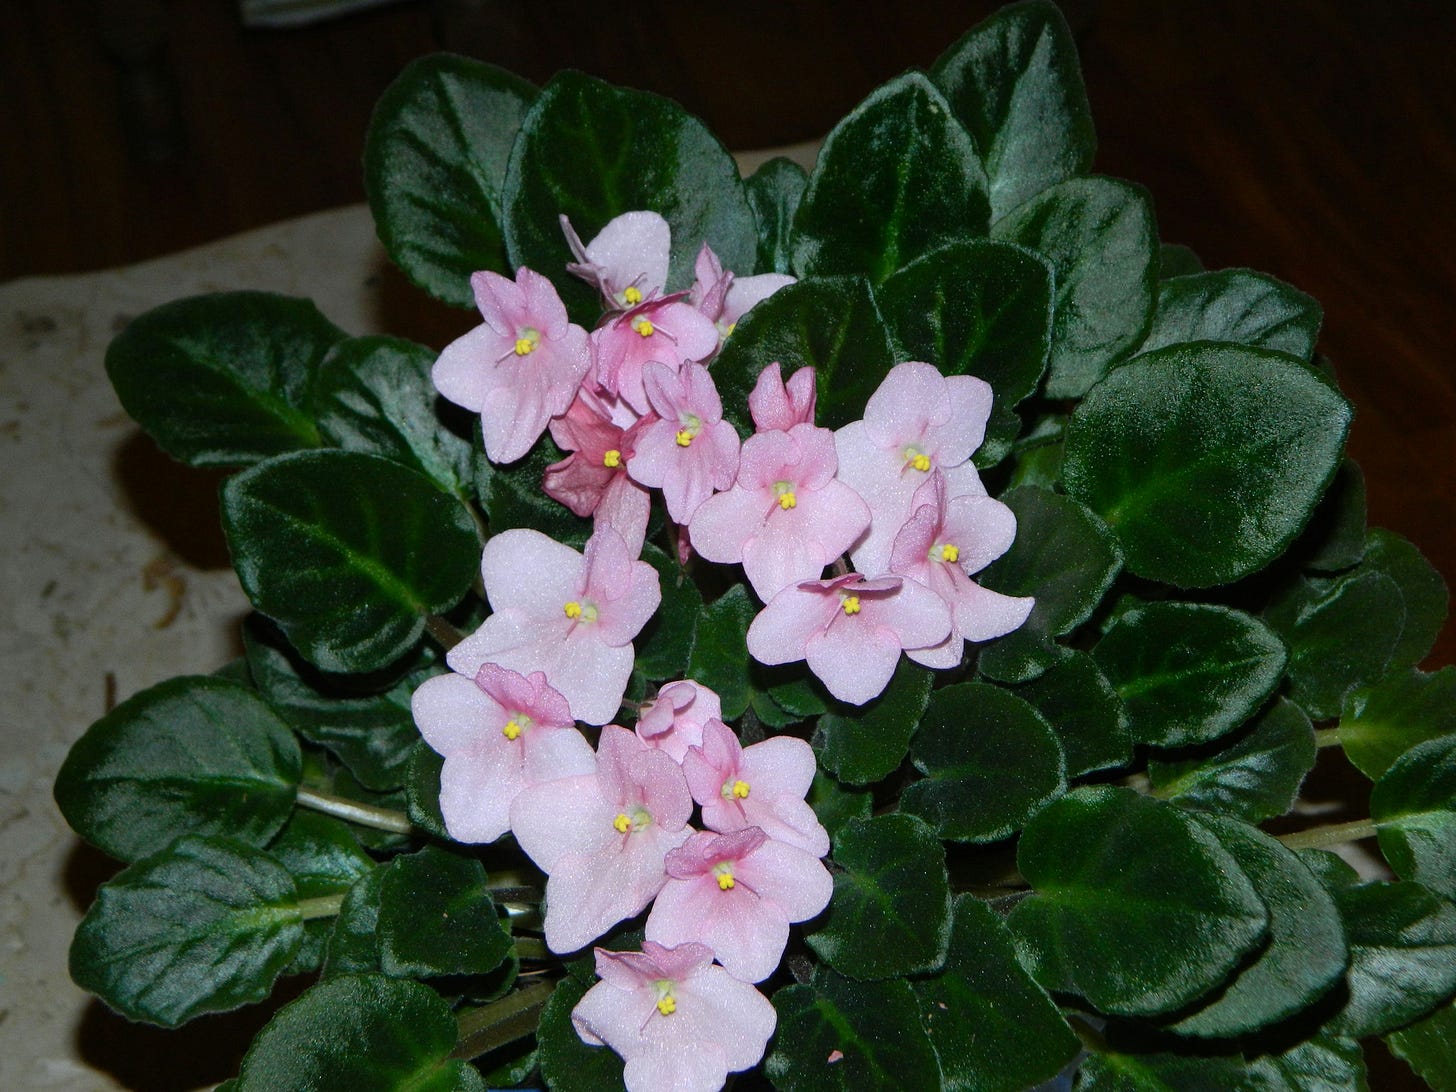 African violet plant with pink flowers